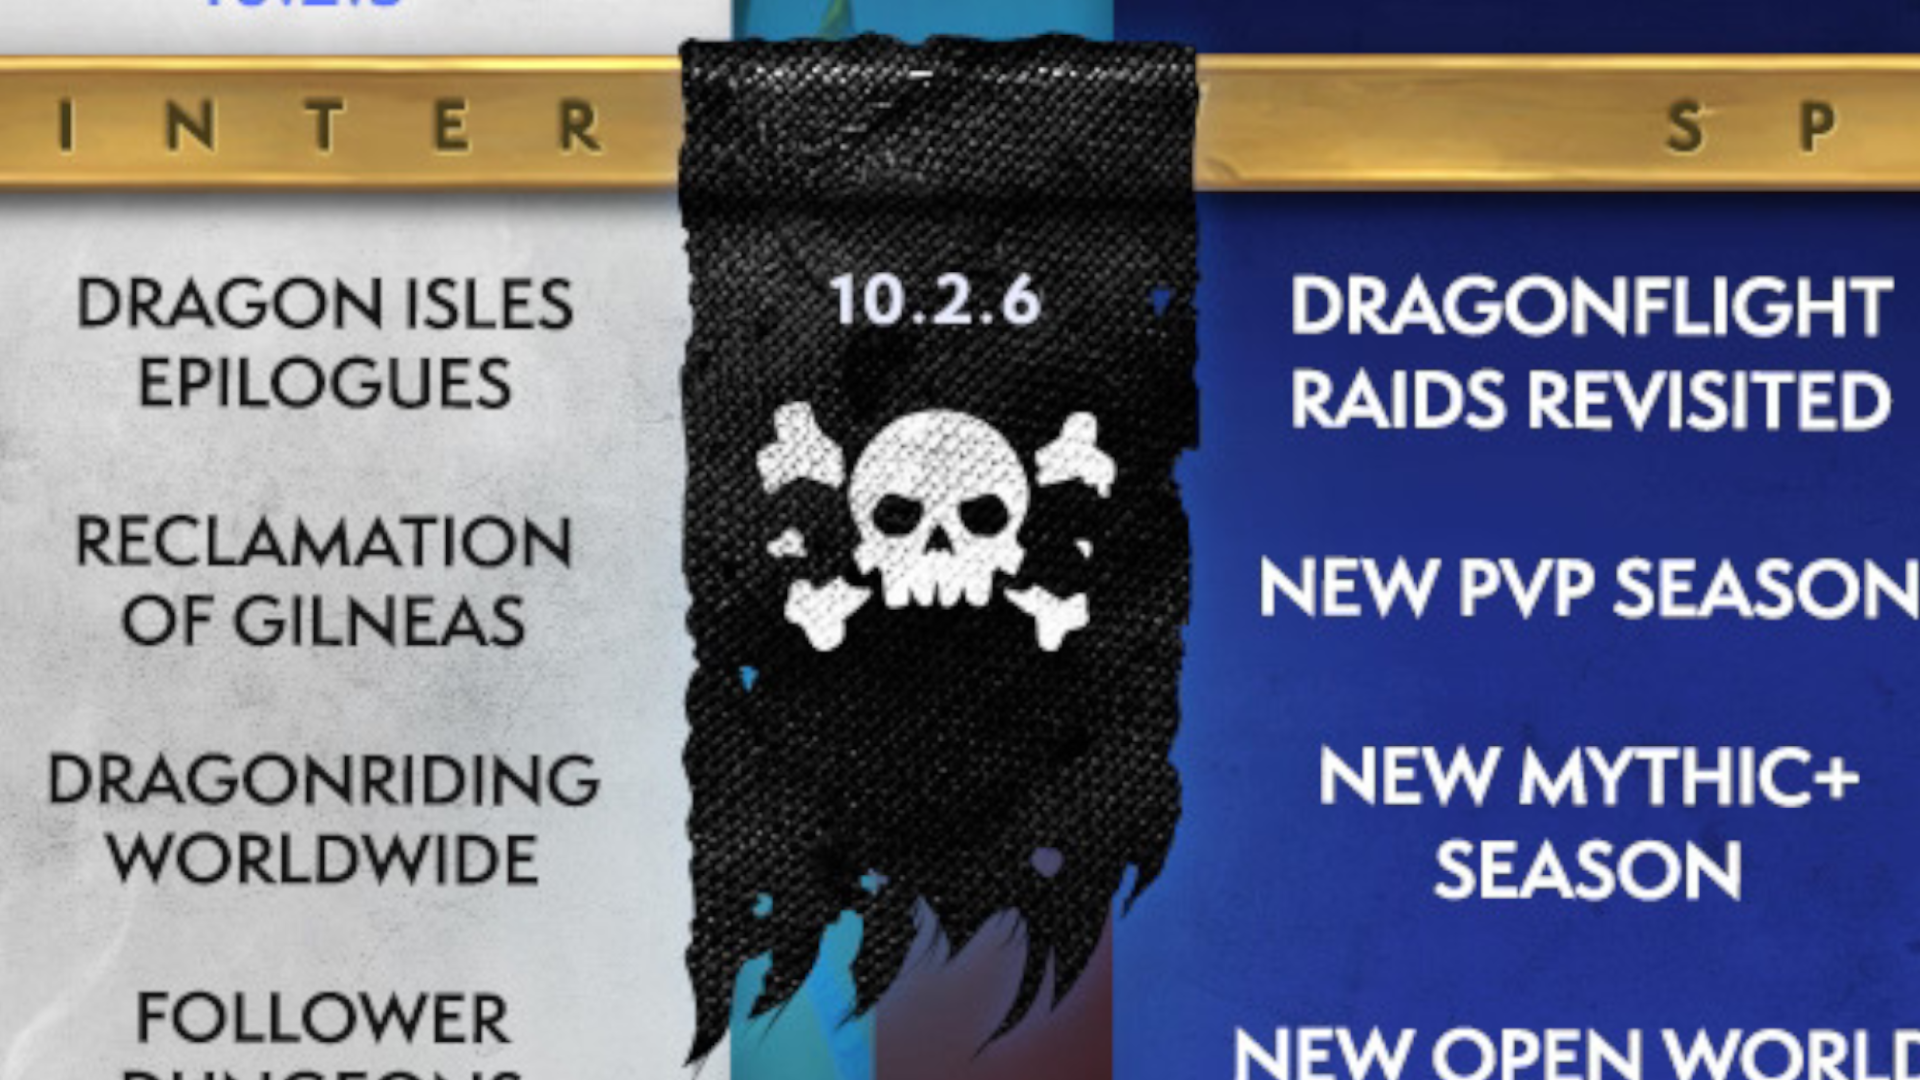 An image from a recent WoW Roadmap with an ominous pirate flag draped over it.